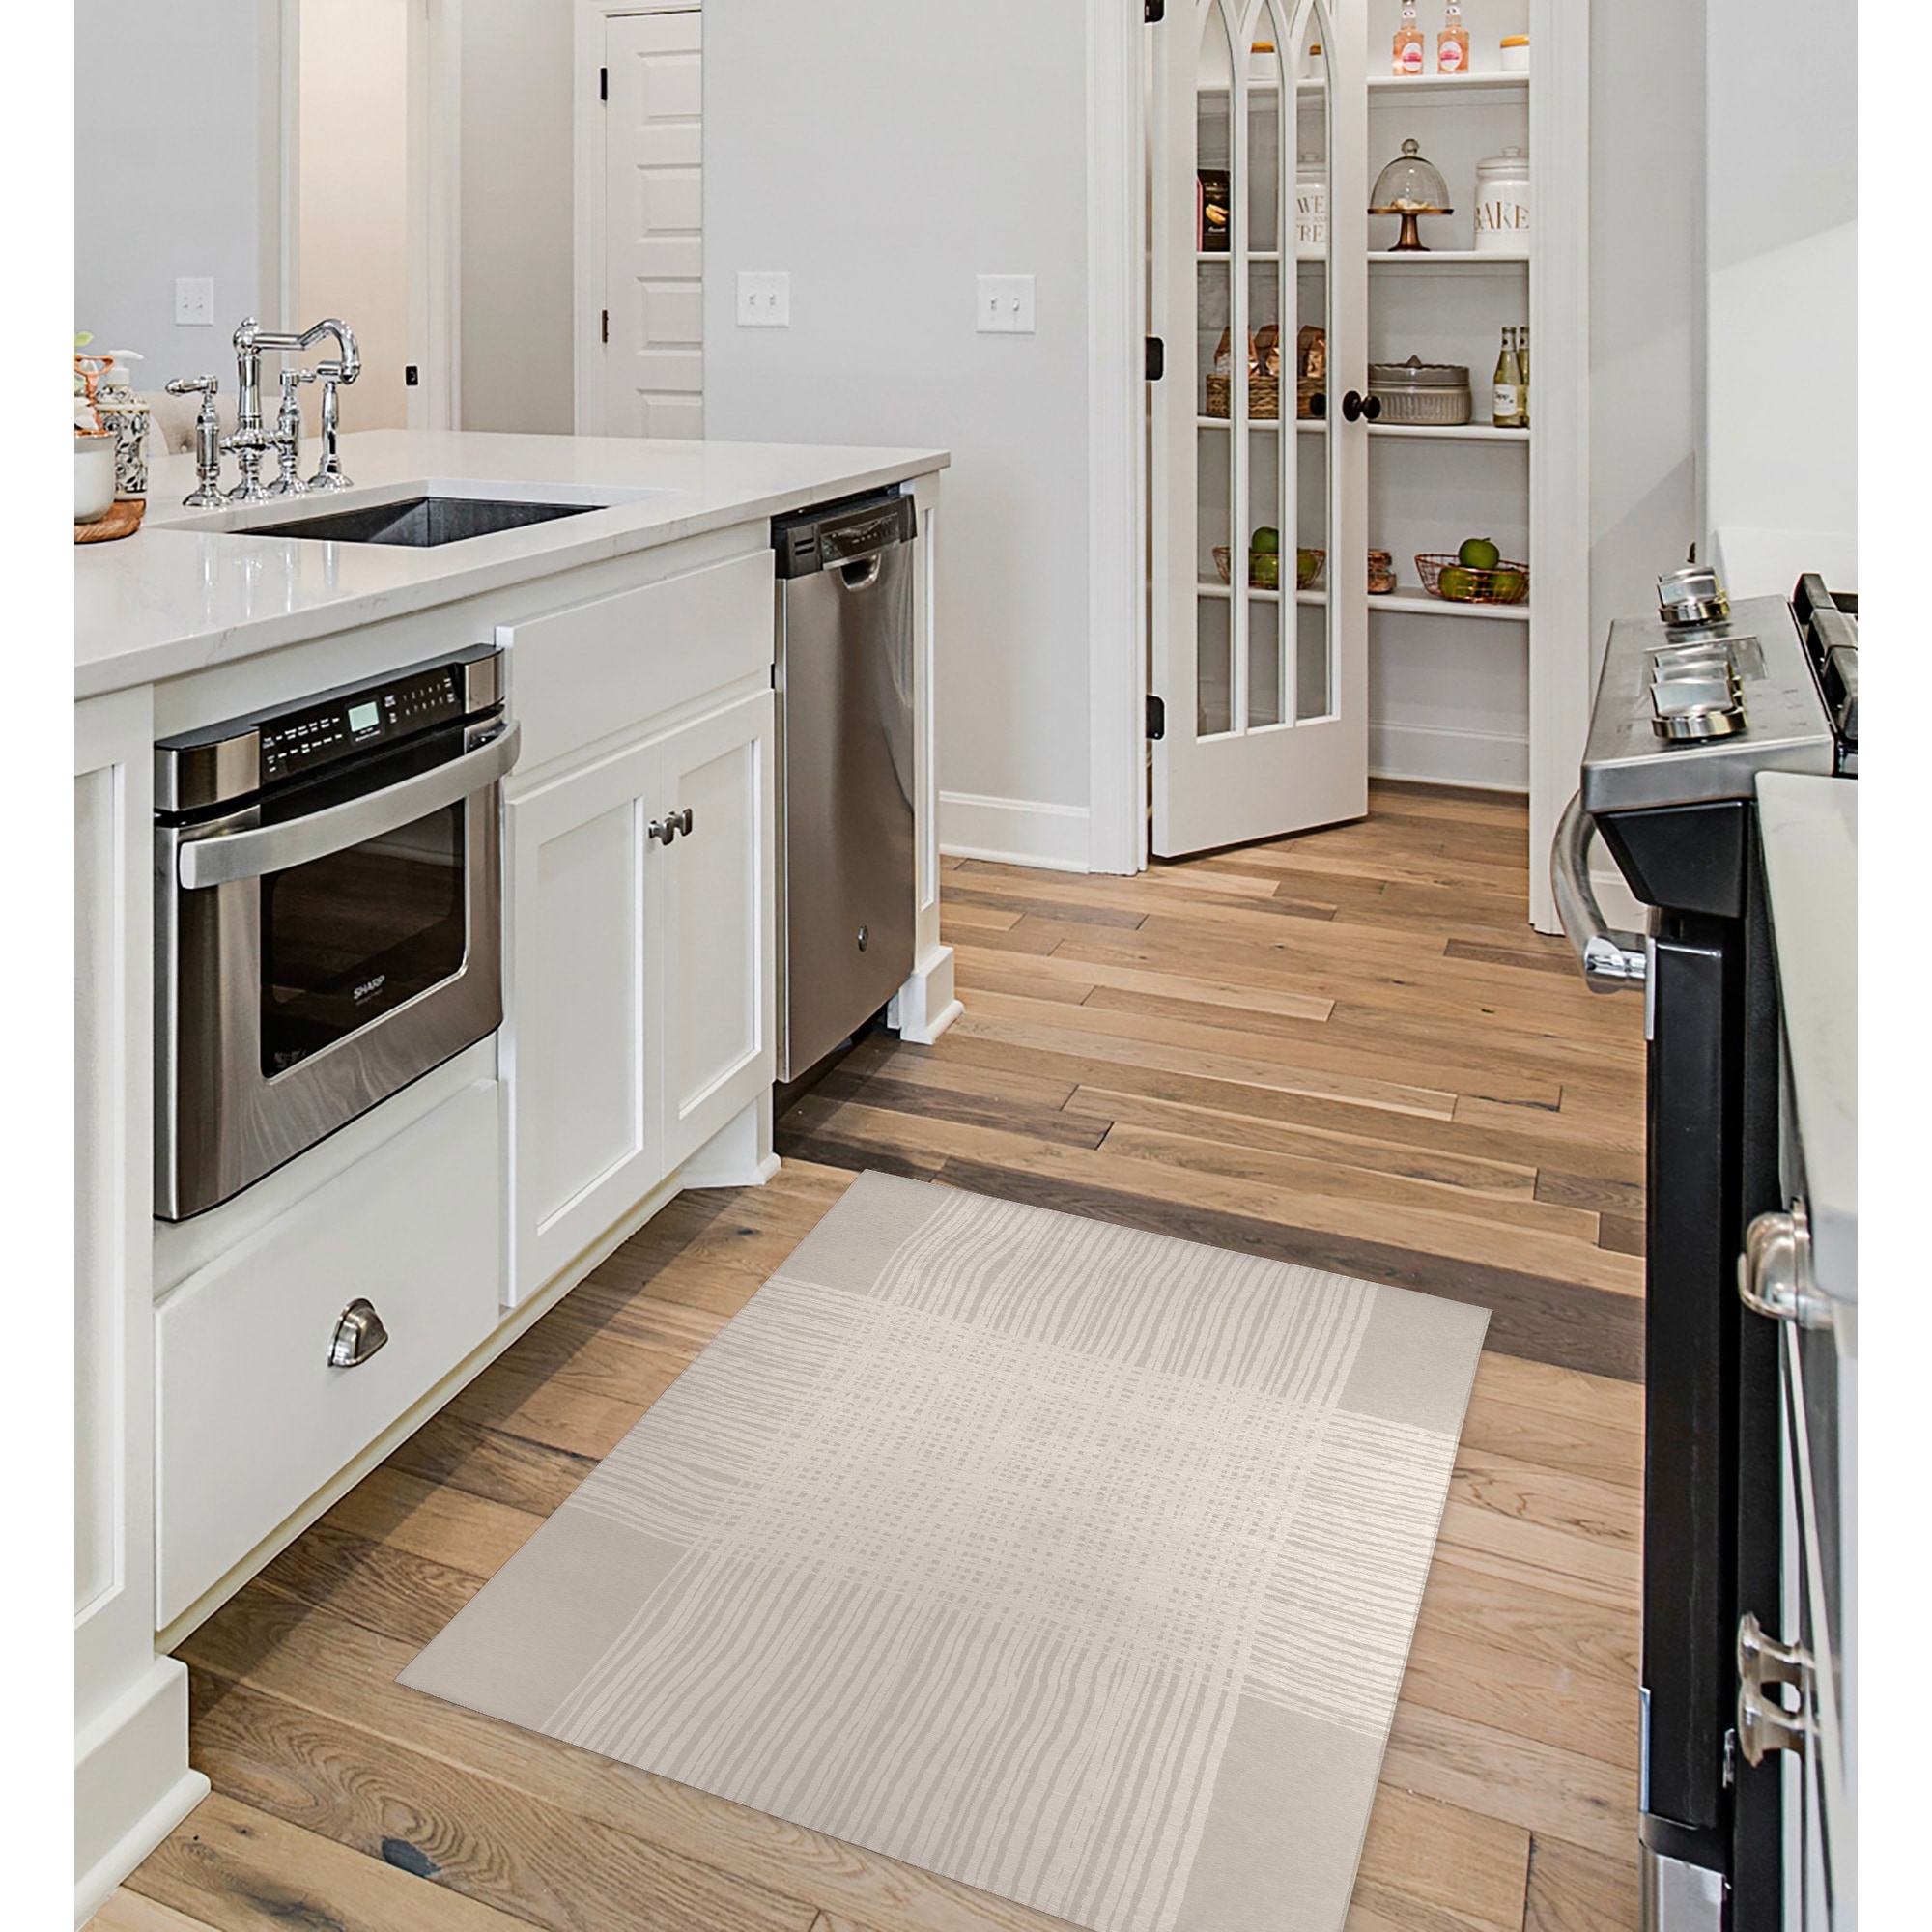 https://ak1.ostkcdn.com/images/products/is/images/direct/2a92380df747292fb01860f8ddbce15e6b7c8f24/PLUS-IVORY-Kitchen-Mat-By-Kavka-Designs.jpg